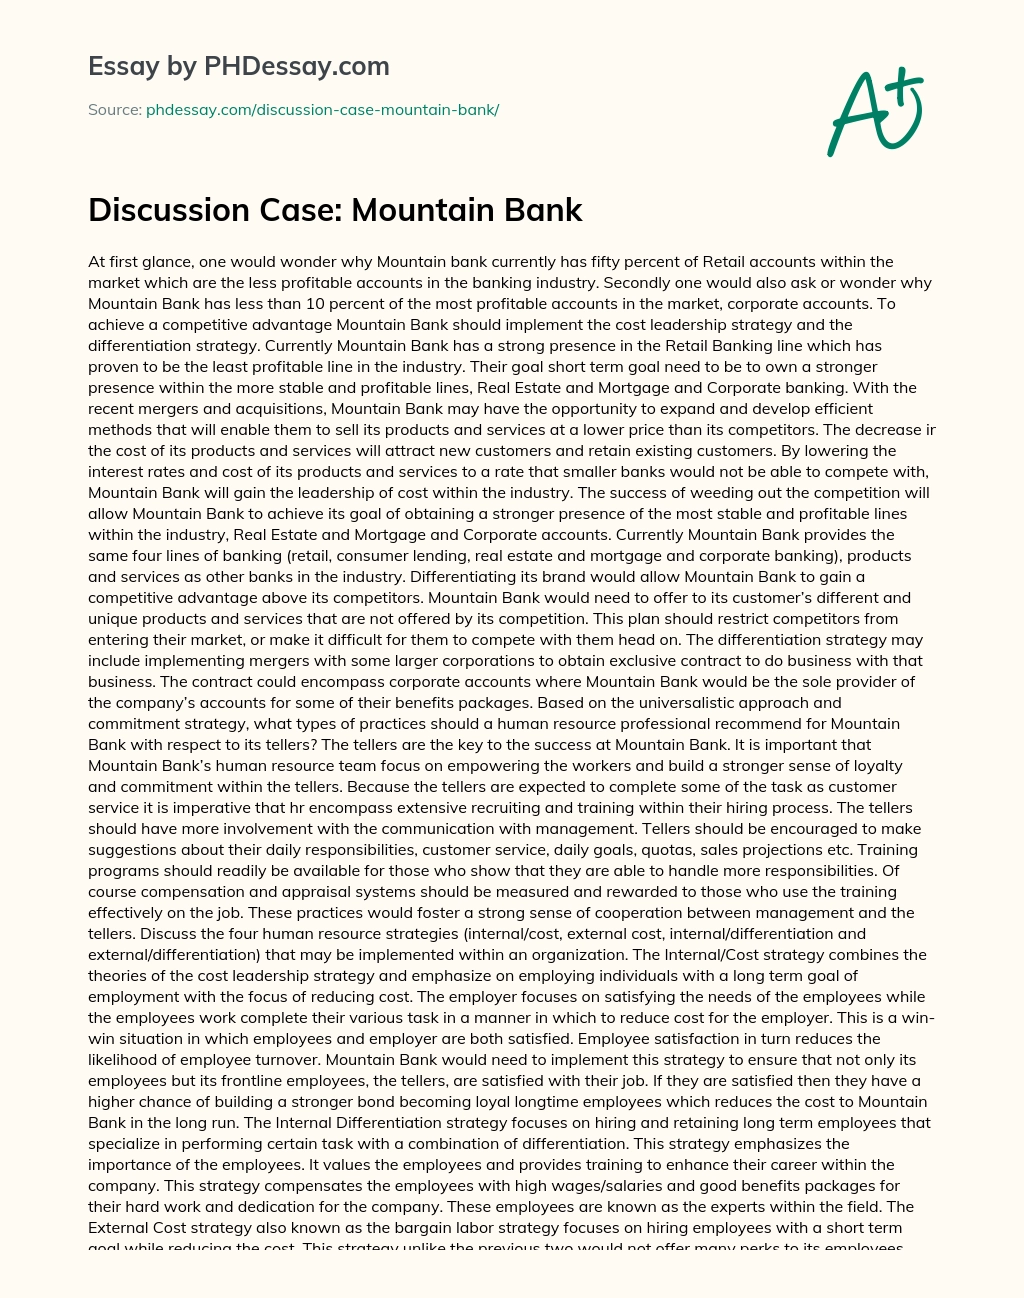 Discussion Case: Mountain Bank essay